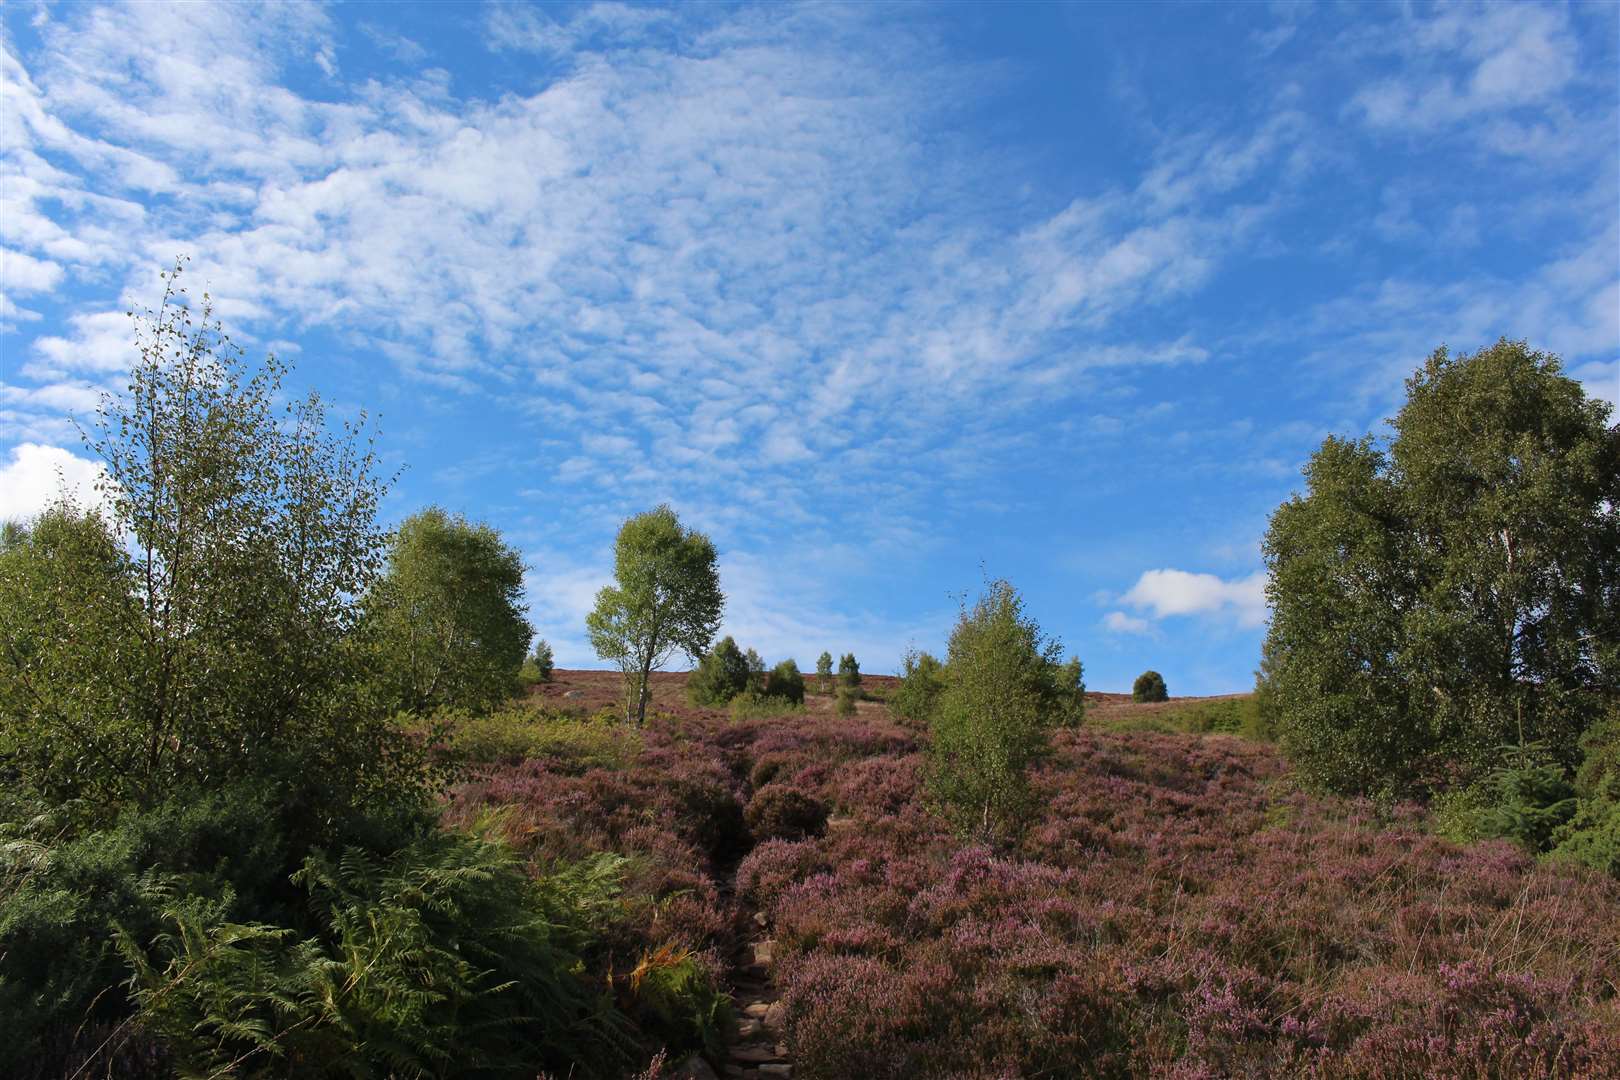 The path up through the heather.